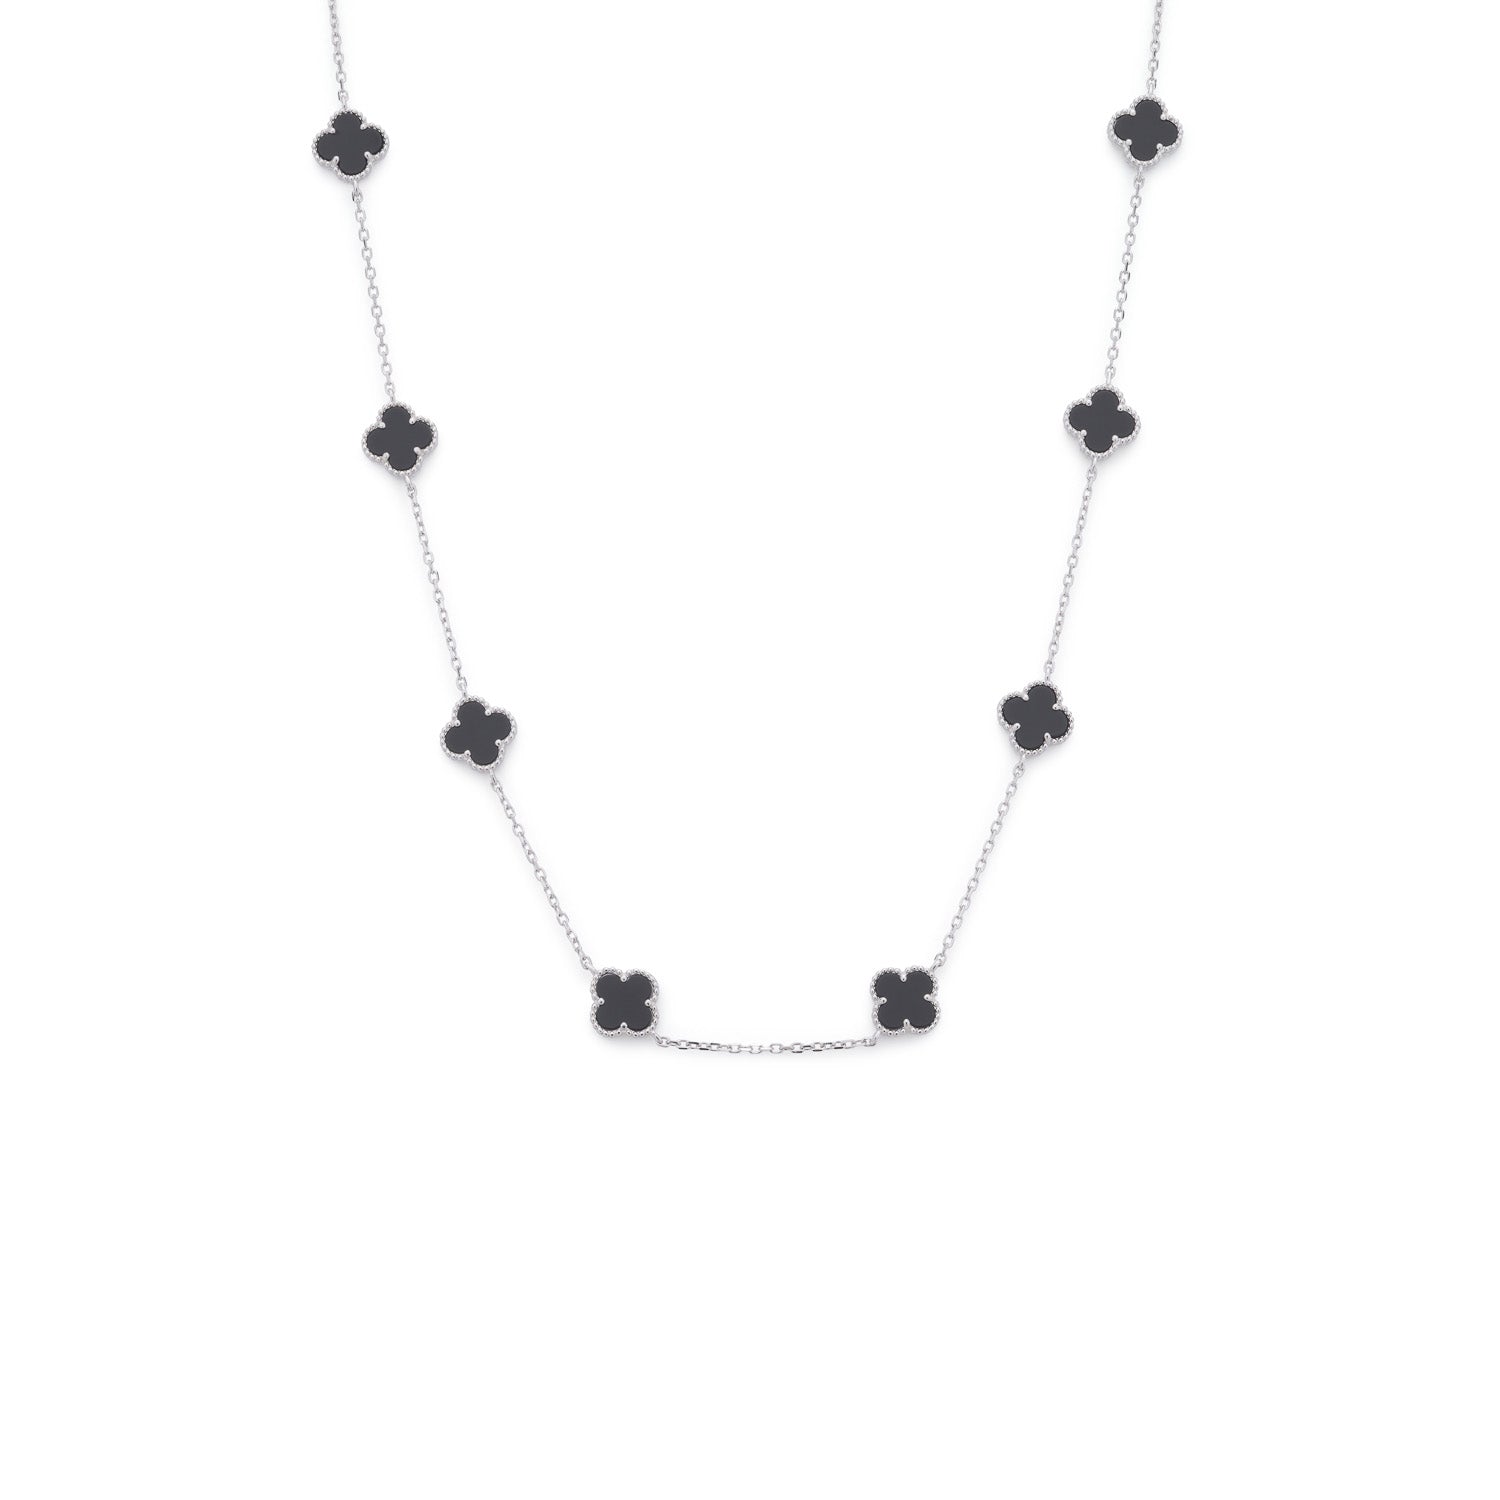 Clover Necklace with Black Onyx (Short) (Silver)